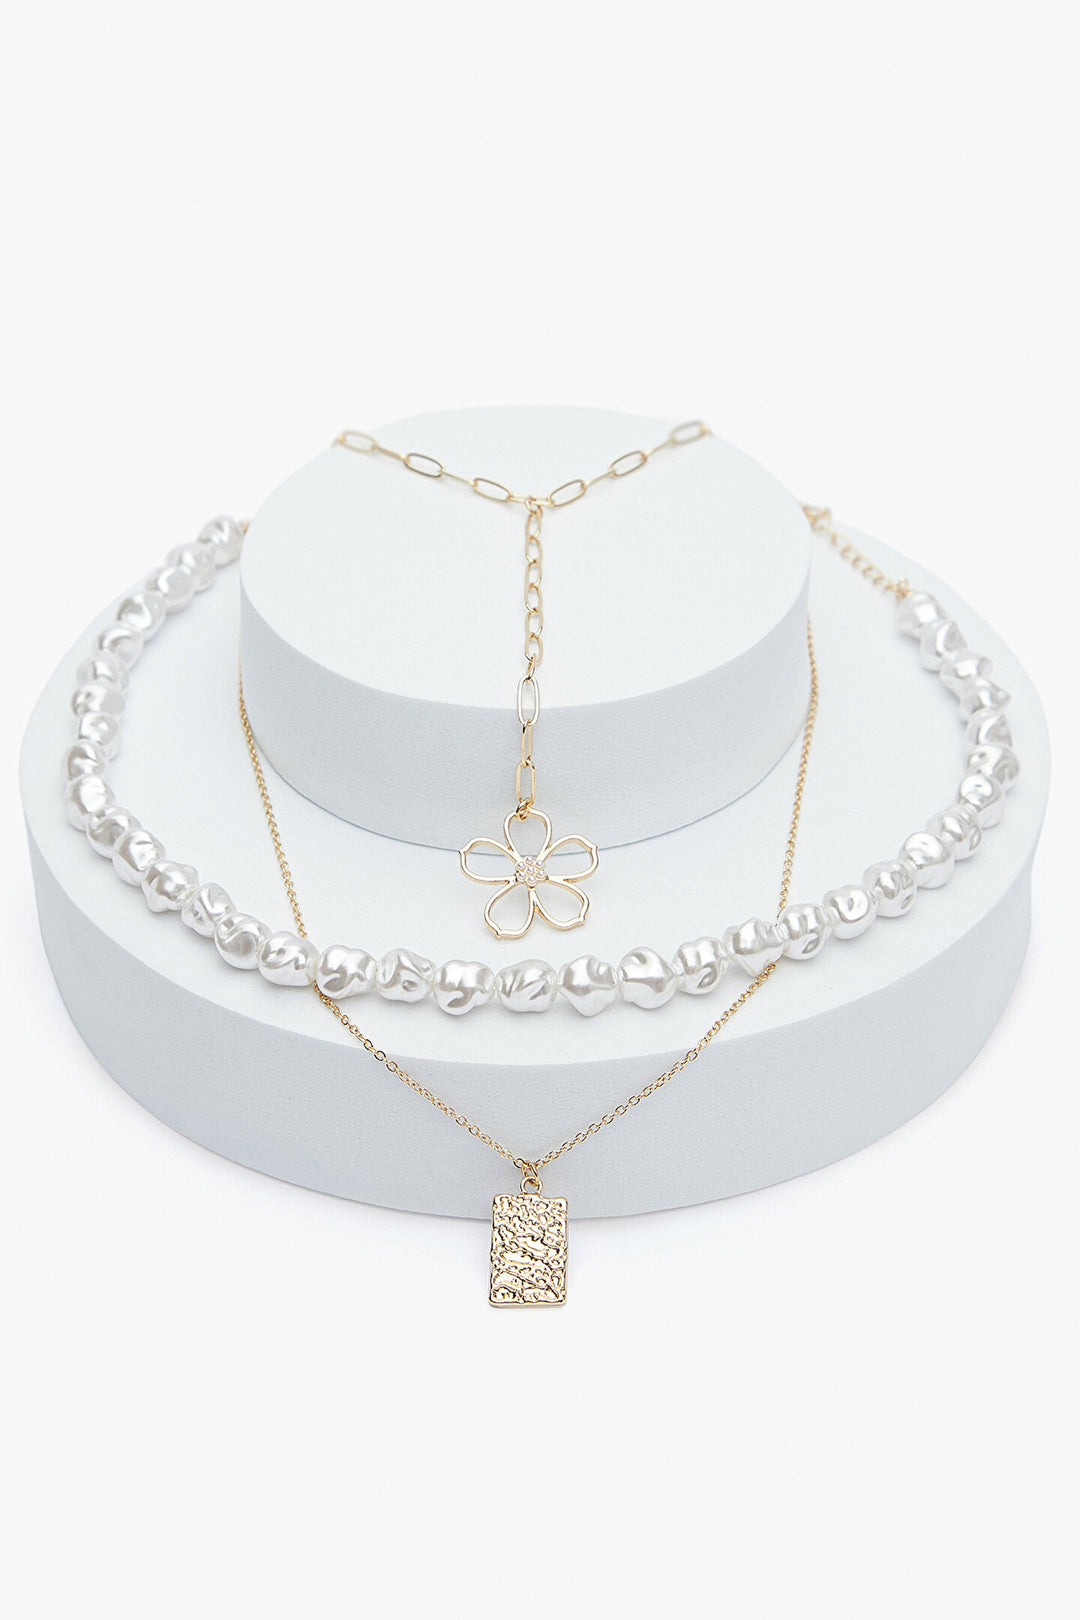 Liana Gold Necklace